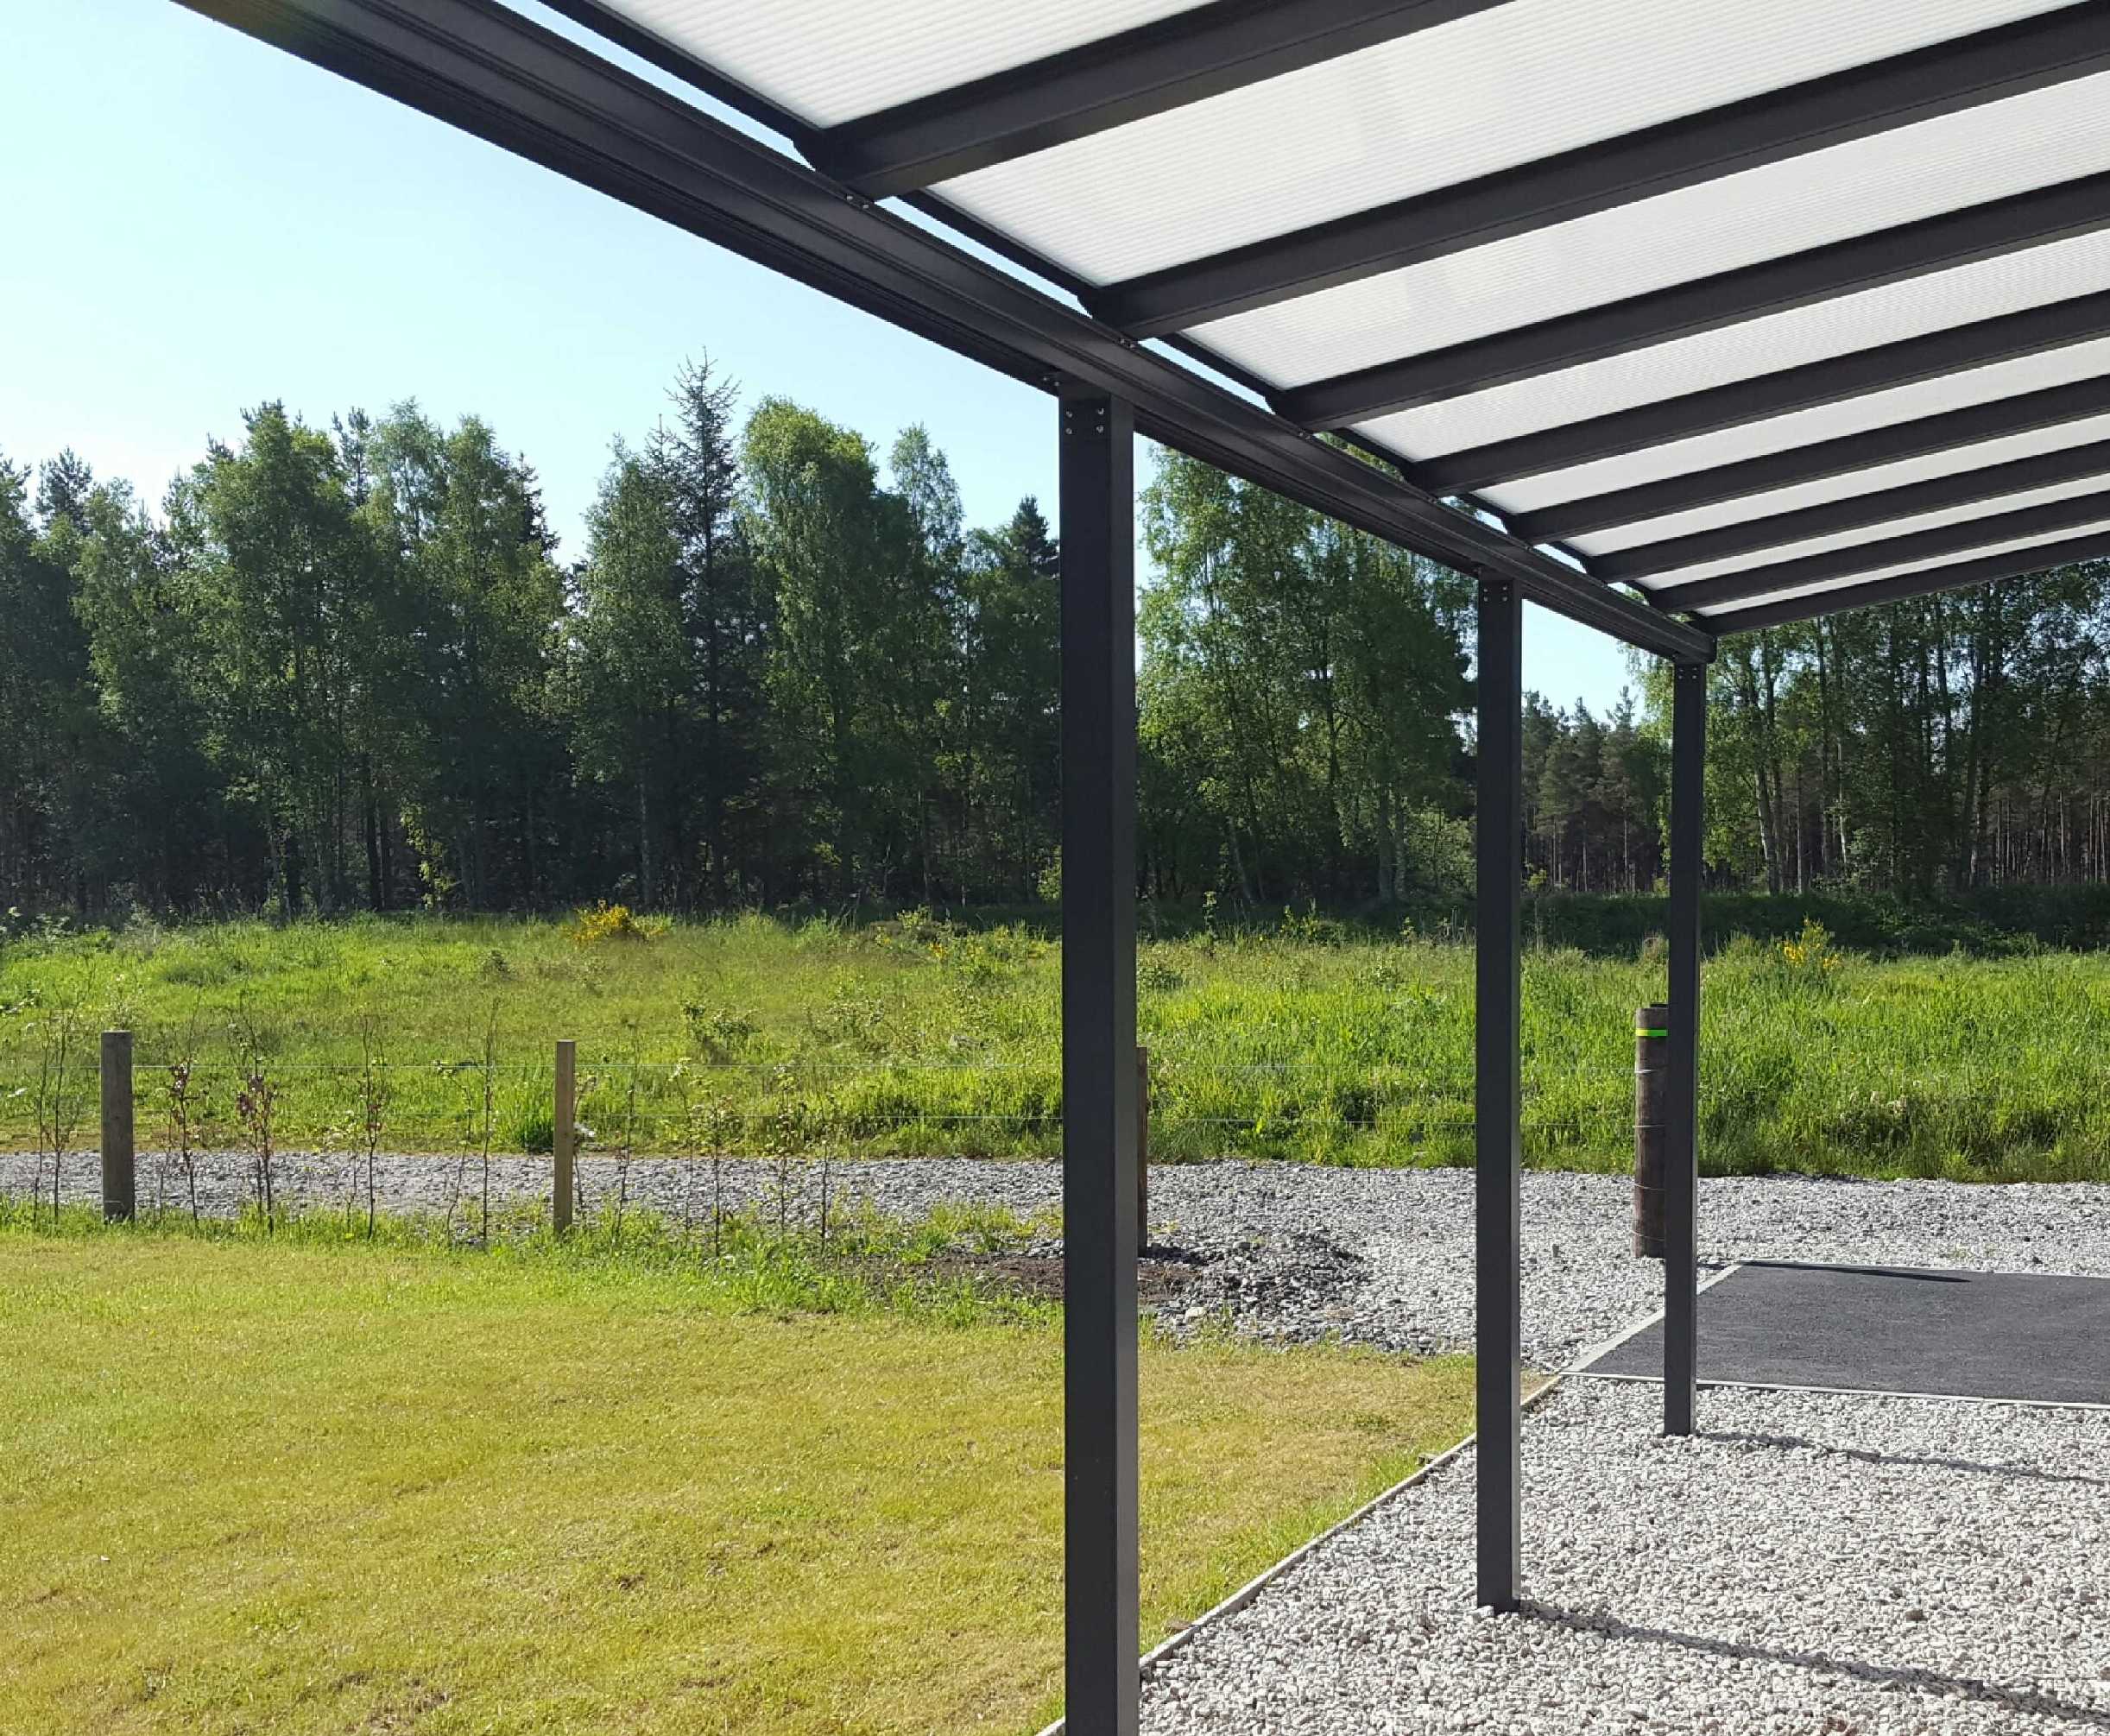 Omega Smart Lean-To Canopy, Anthracite Grey, UNGLAZED for 6mm Glazing - 10.5m (W) x 2.5m (P), (5) Supporting Posts